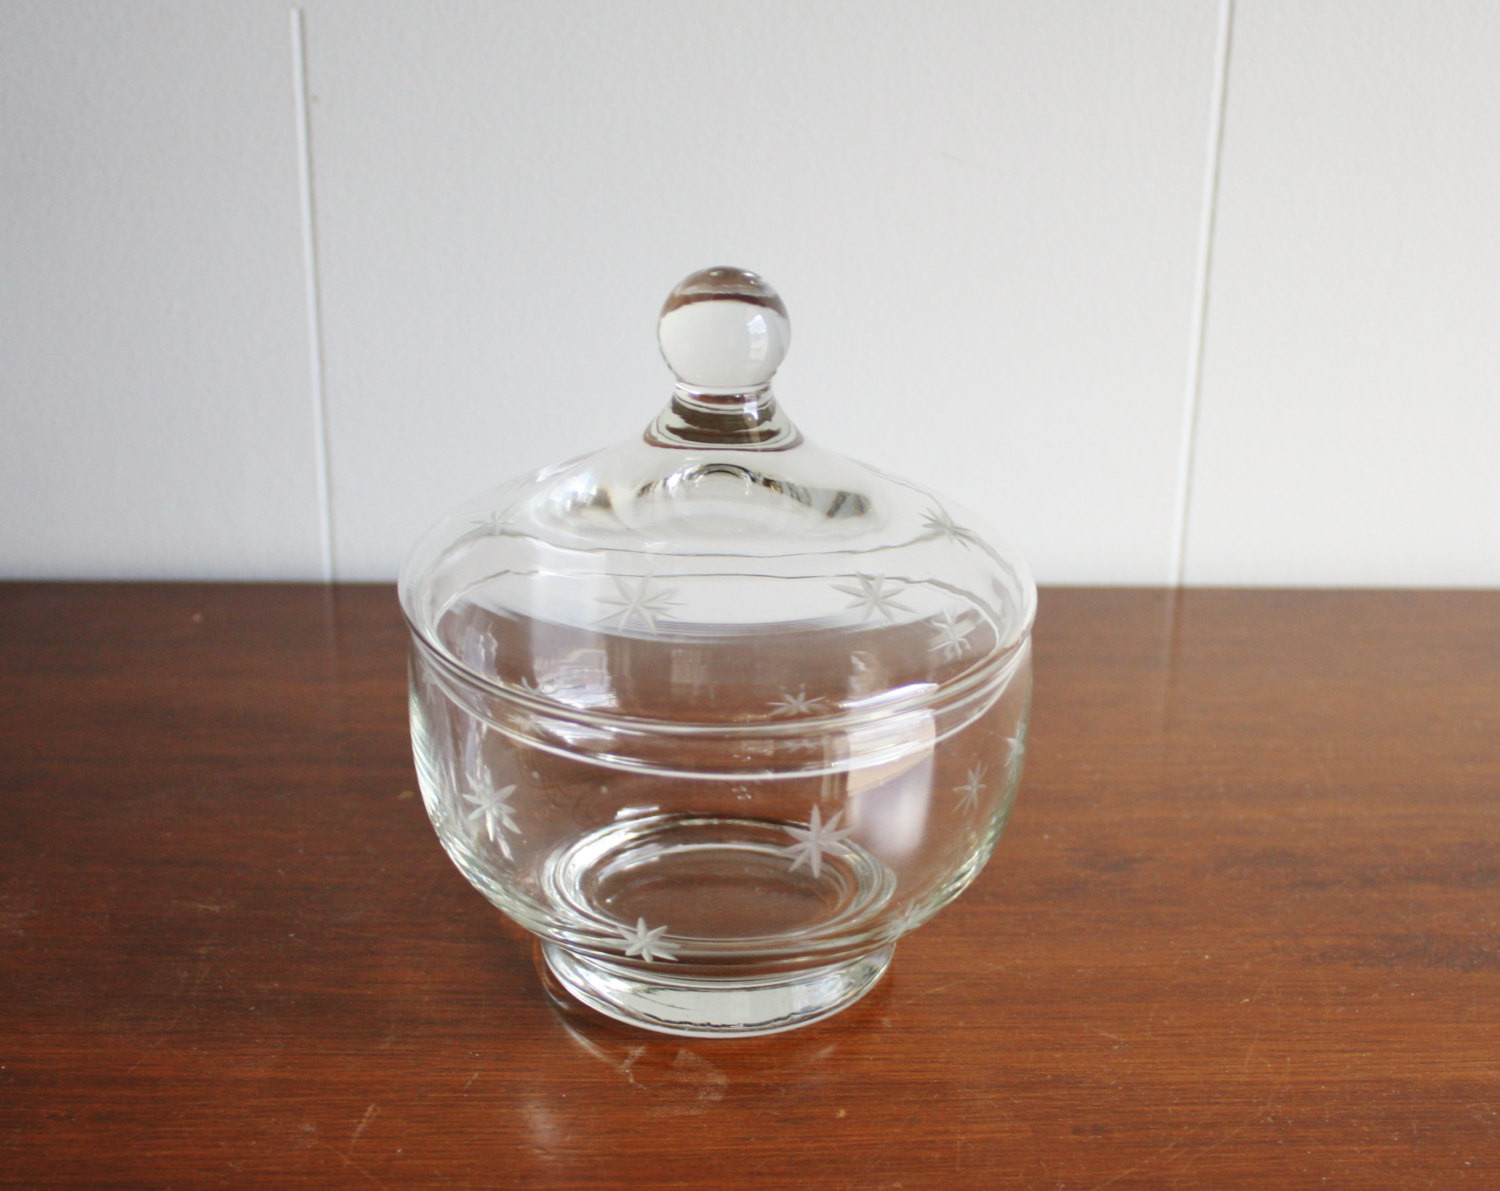 Christmas Candy Dish With Lid
 Etched glass candy dish with lid